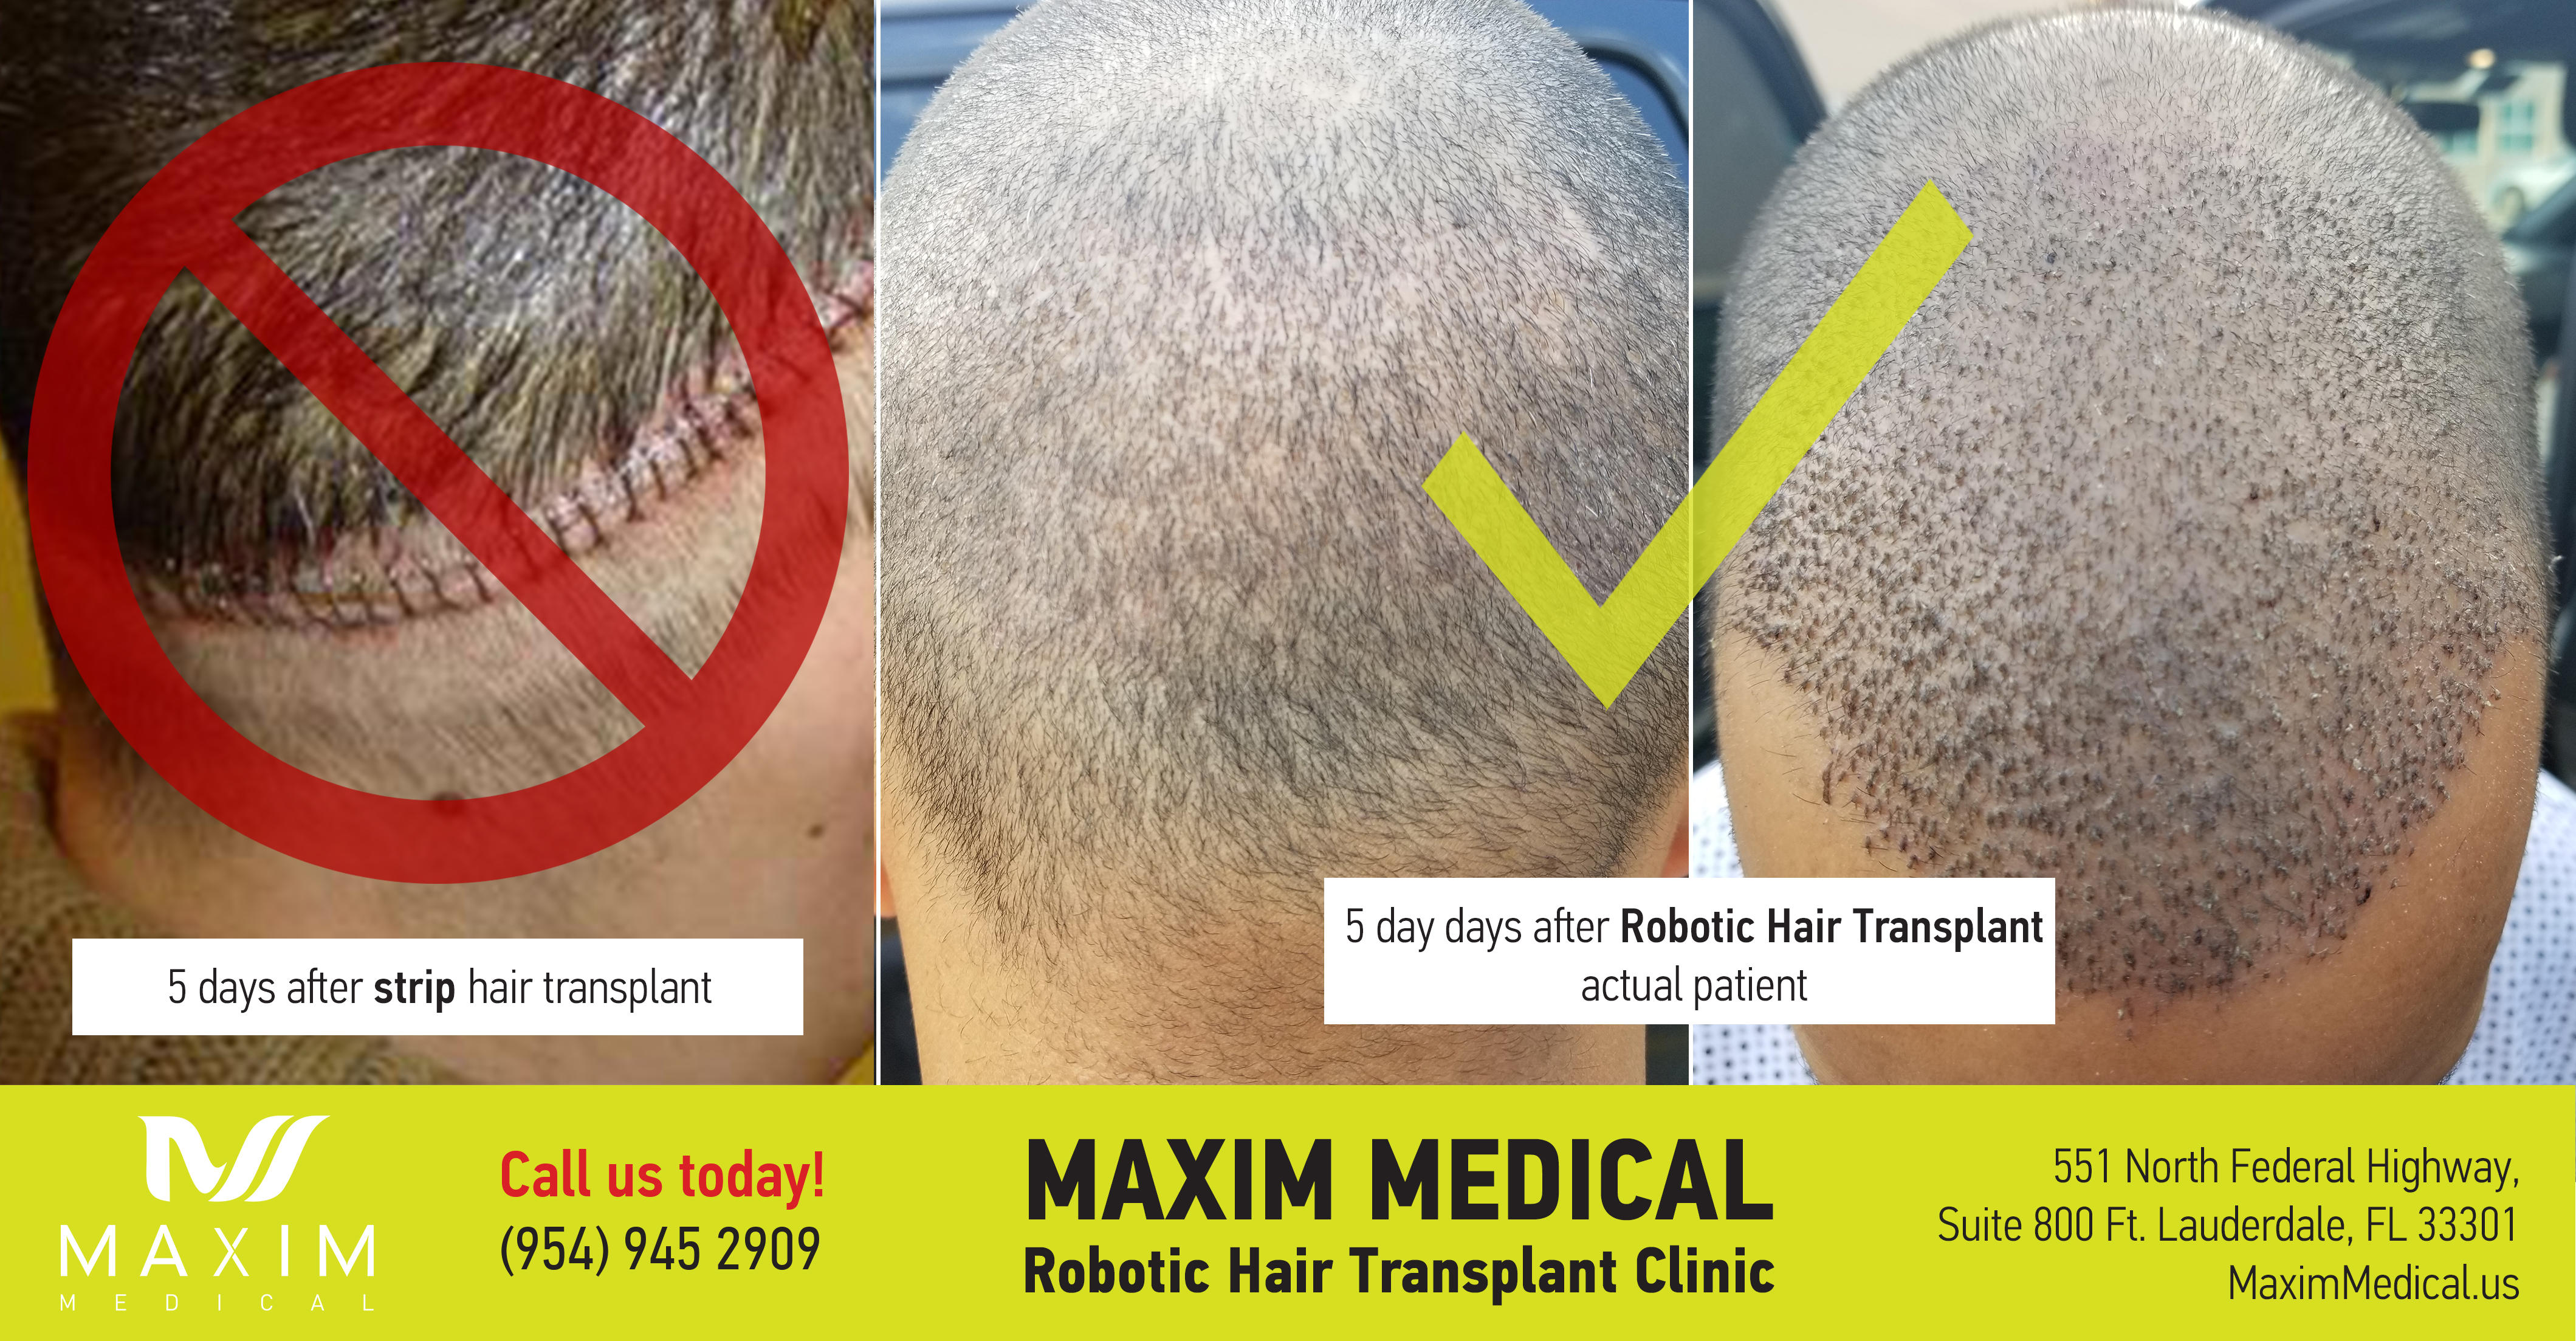 Maxim Medical hair transplant patient from 5 days ago. No scar, almost undetectable implant harvesting area. 2100 grafts transplanted using ARTAS® Robotic. Grafts can be selected automatically to have 3 or more hairs each. Patient got back to work on the next day.